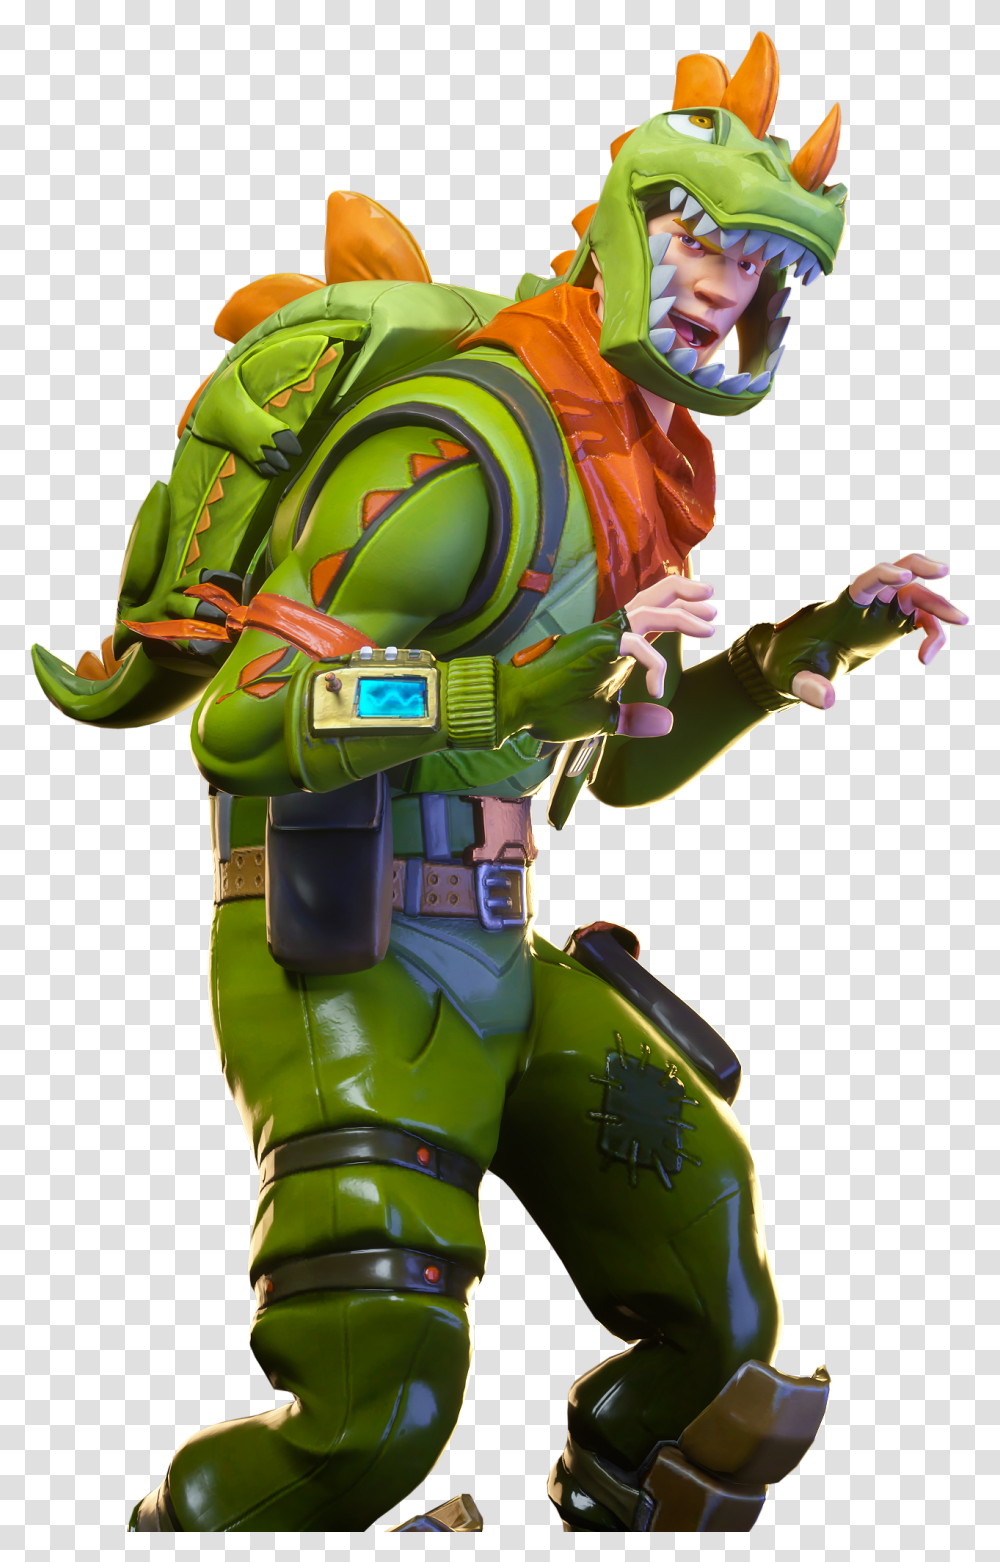 Christian J Liquid Fortnite Fortnite Free To Use Renders, Toy, Overwatch, Costume, Sweets Transparent Png